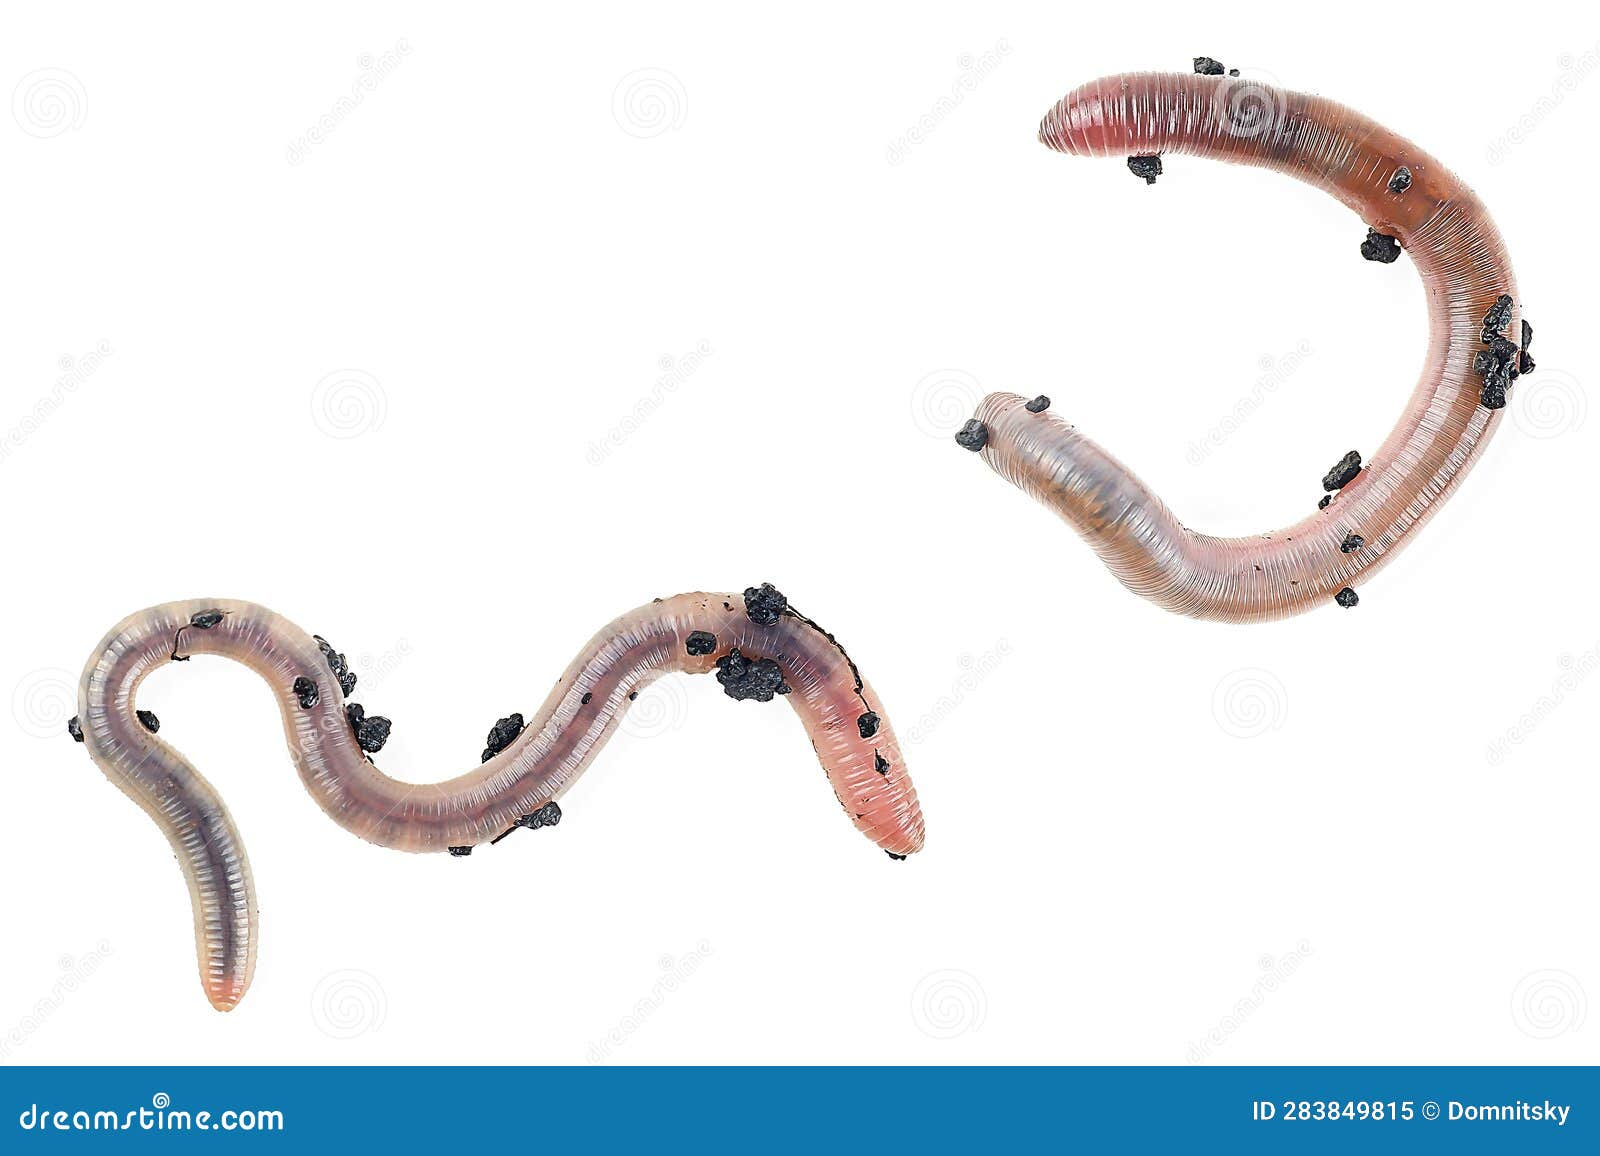 Two Earthworms Isolated on White Background, Top View. Small